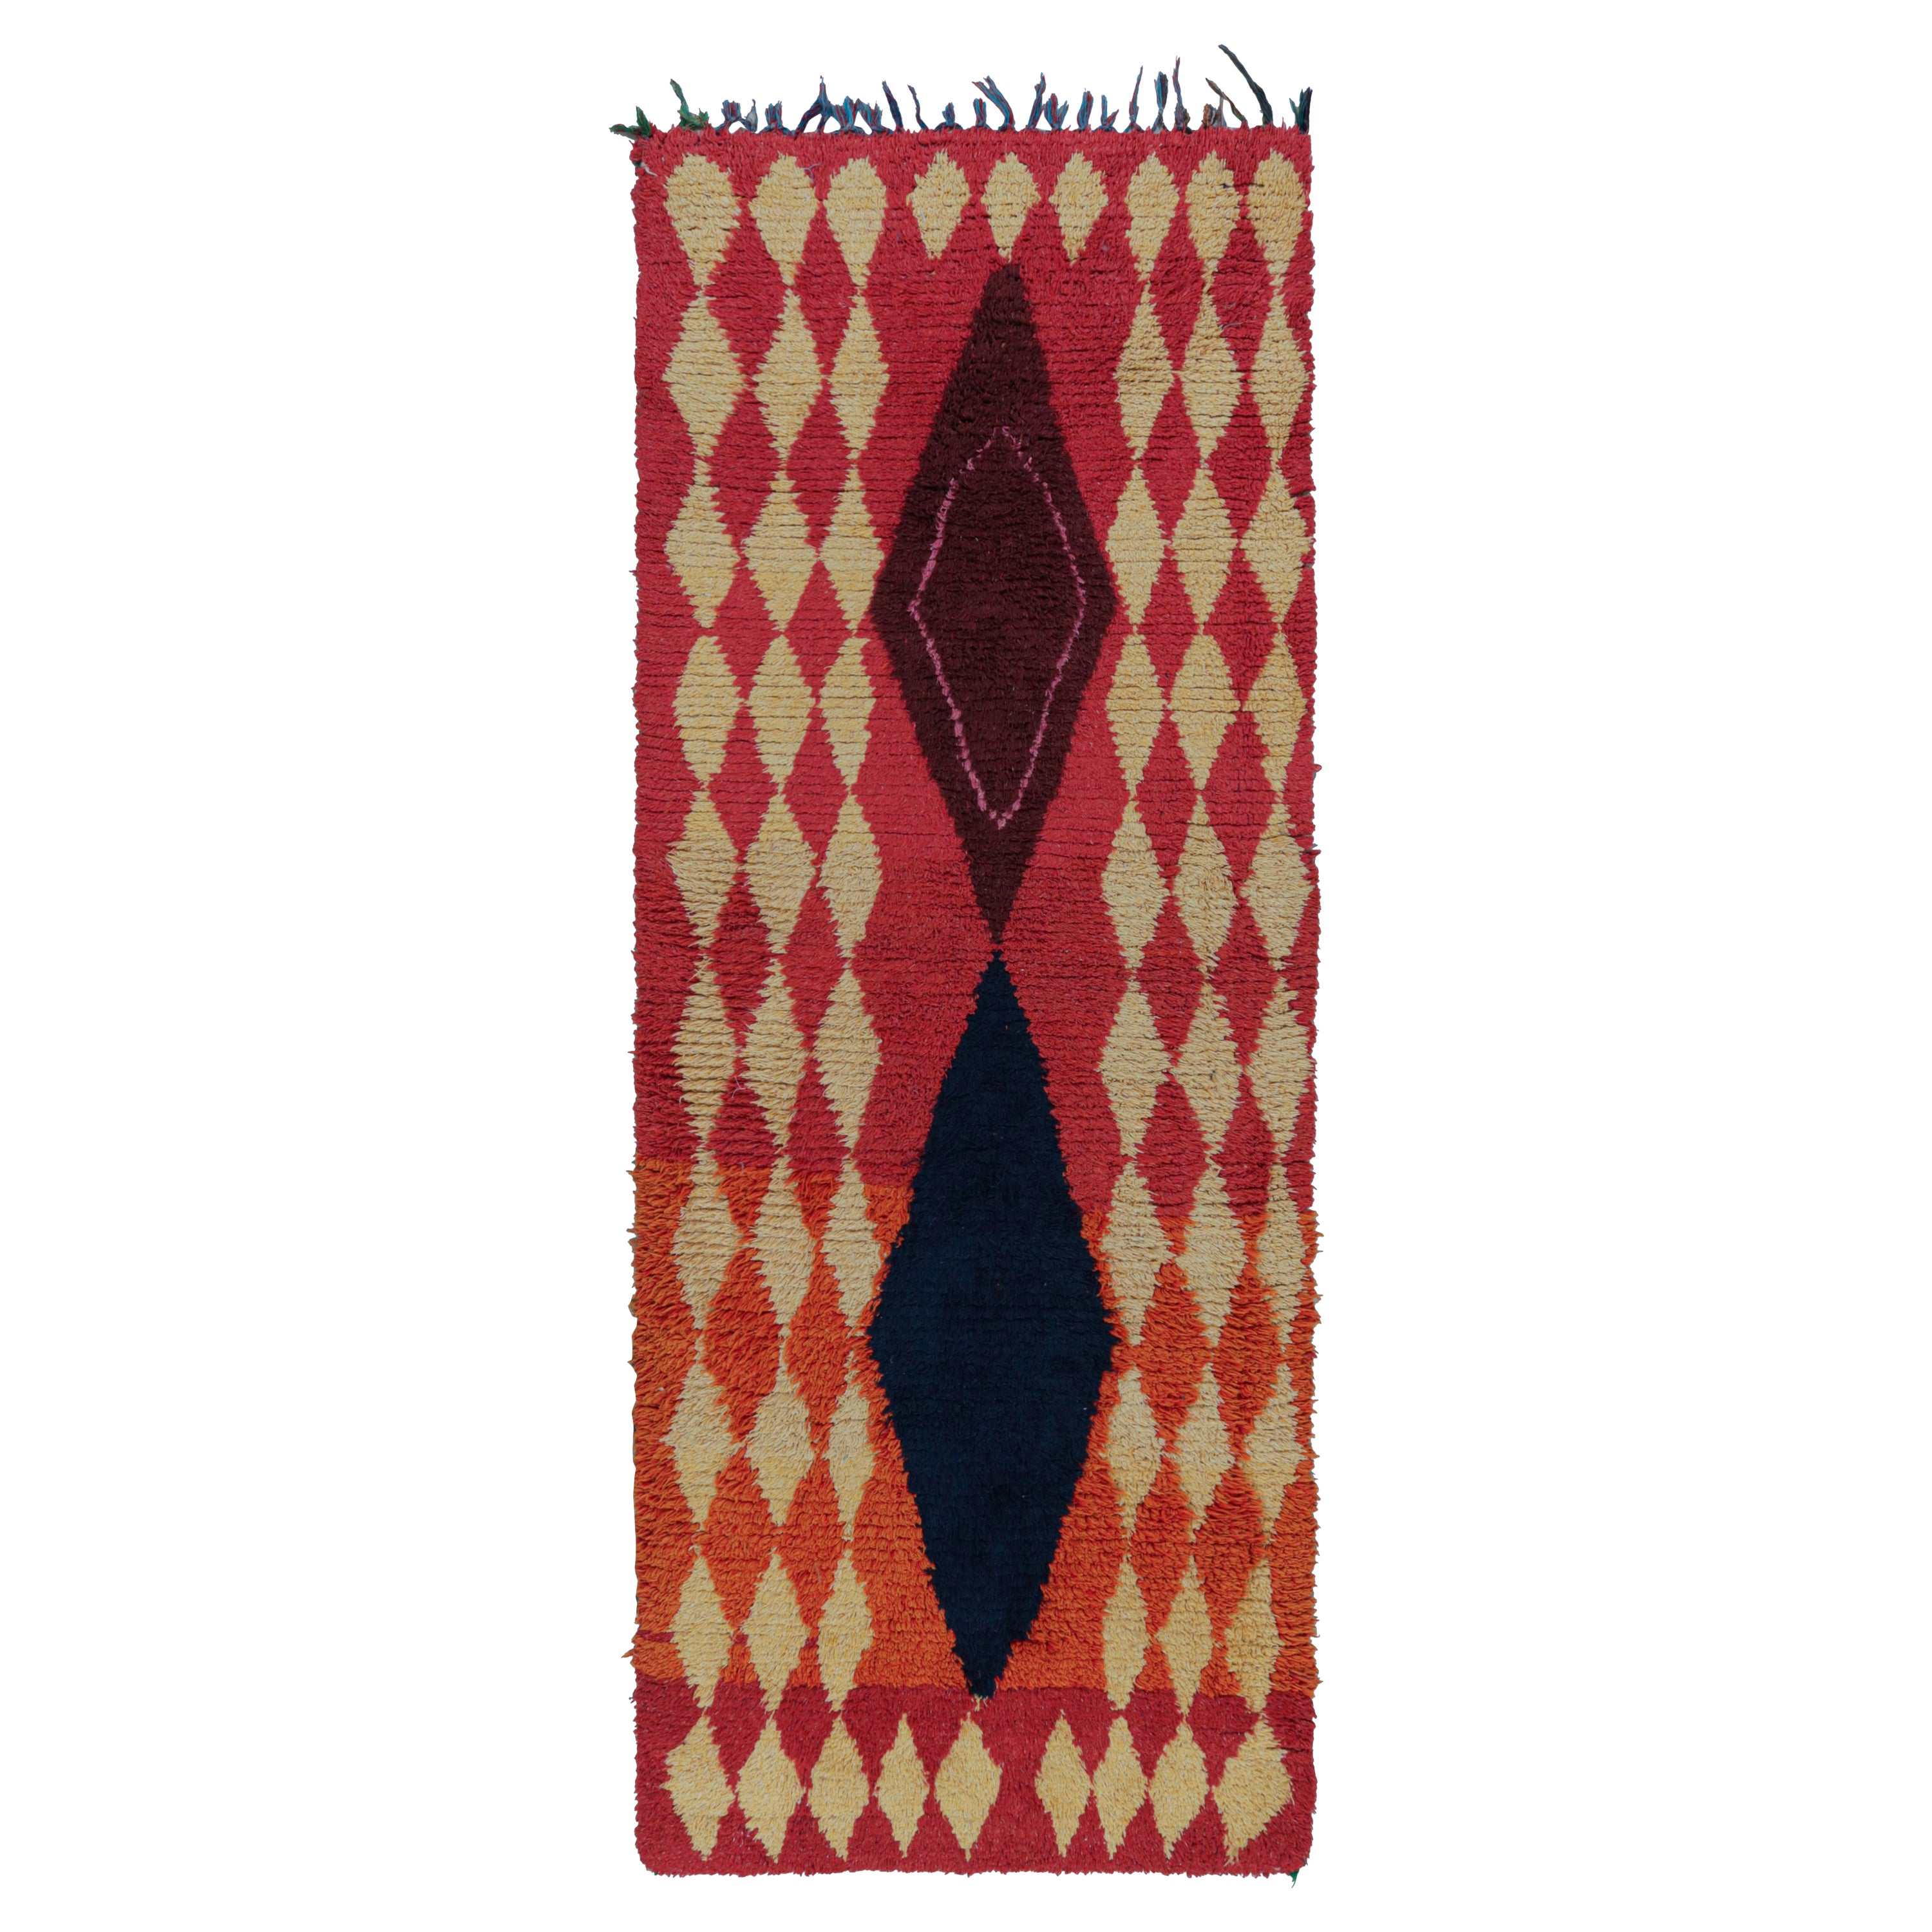 1950s Azilal Moroccan runner rug in Polychromatic Tribal Patterns by Rug & Kilim